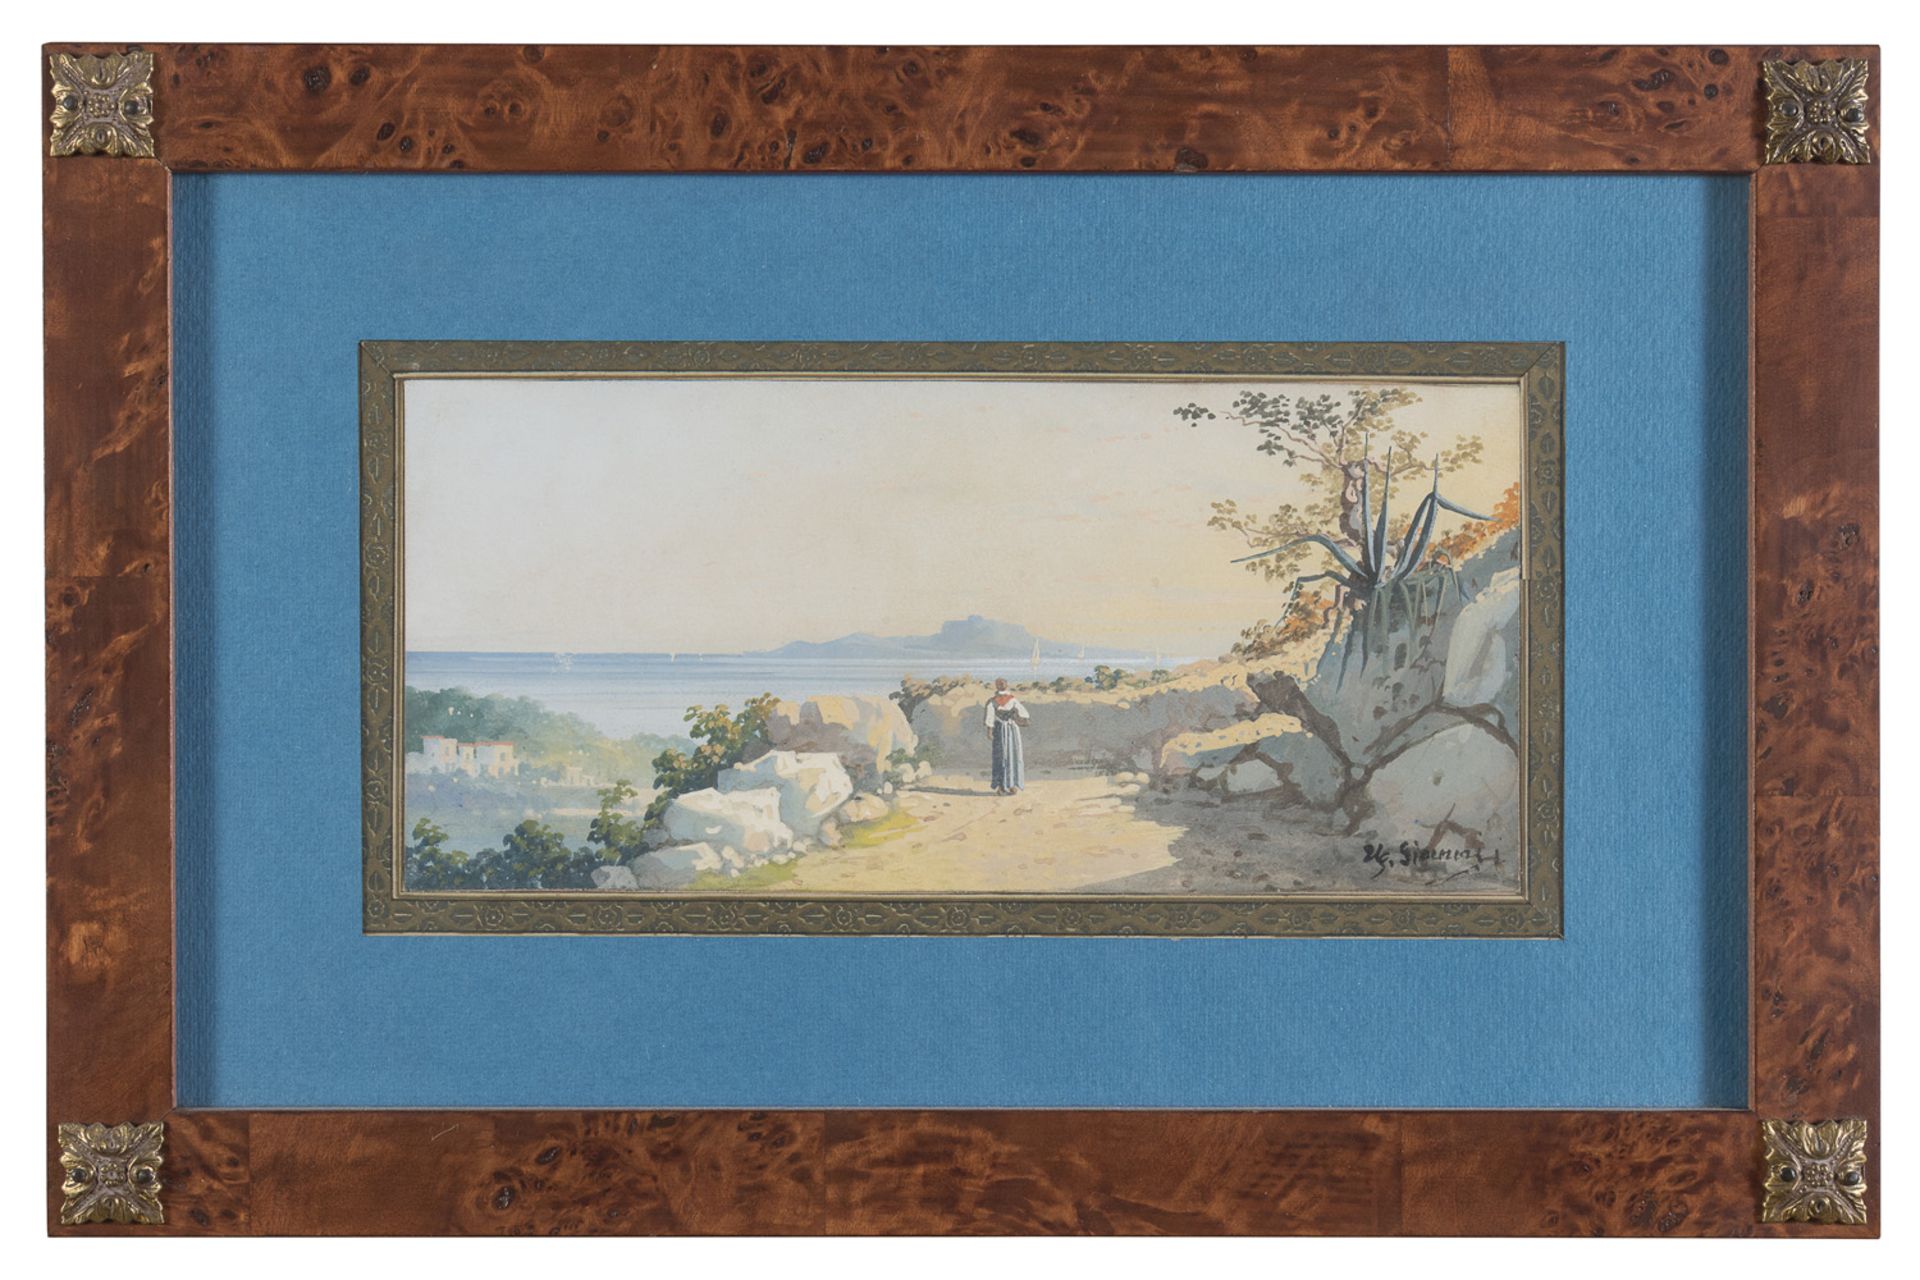 PAIR OF WATERCOLORS OF NAPLES BY YVES GIANNI (19TH-20TH CENTURY) - Image 2 of 2